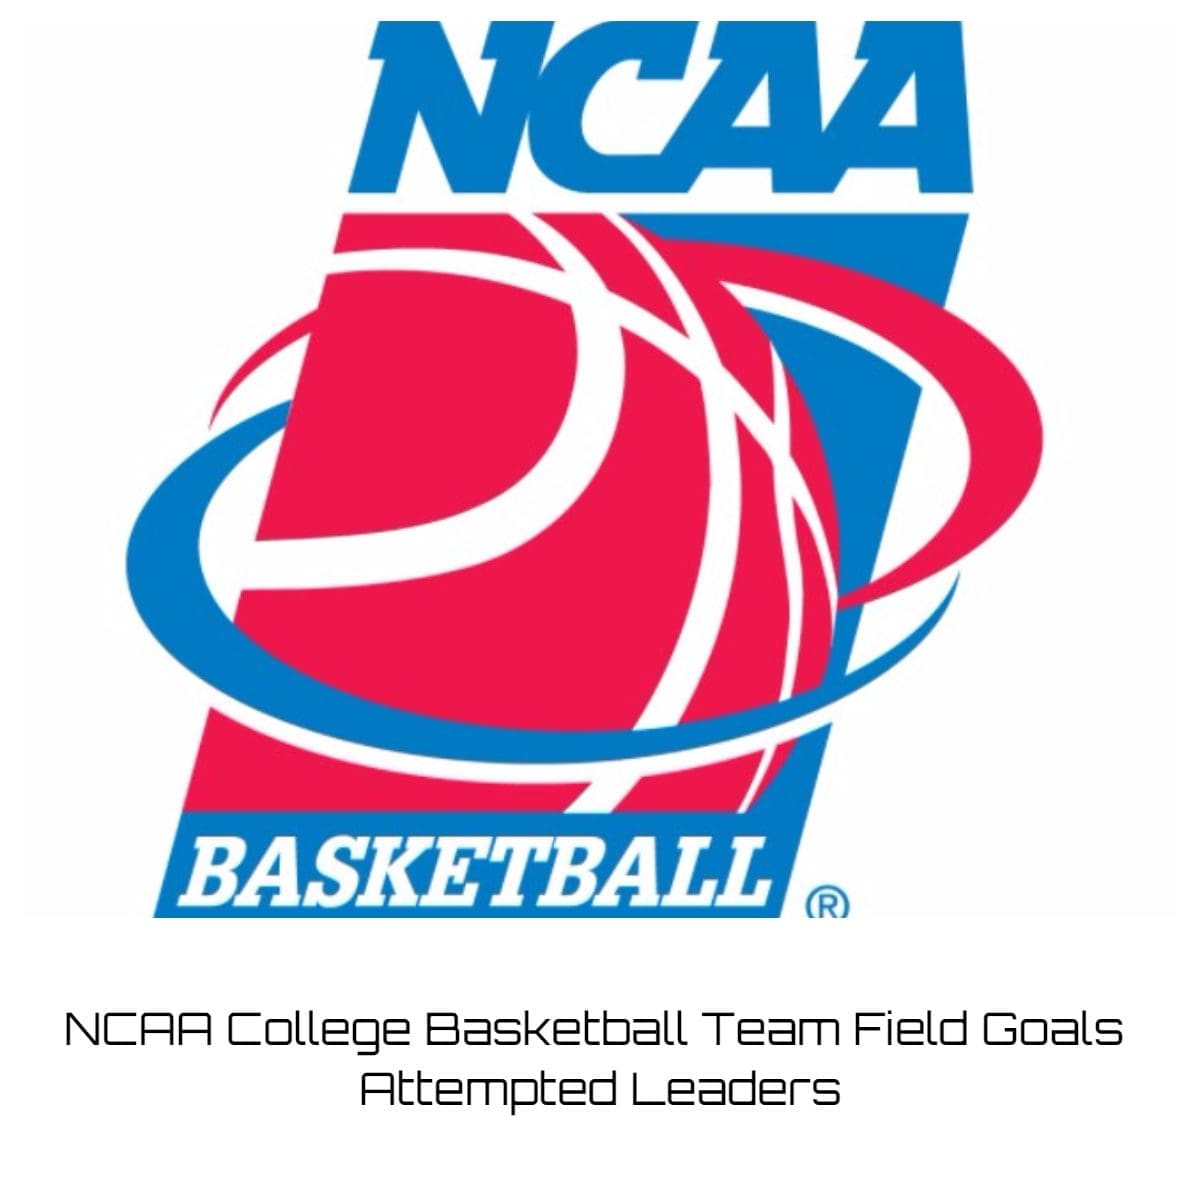 NCAA College Basketball Team Field Goals Attempted Leaders